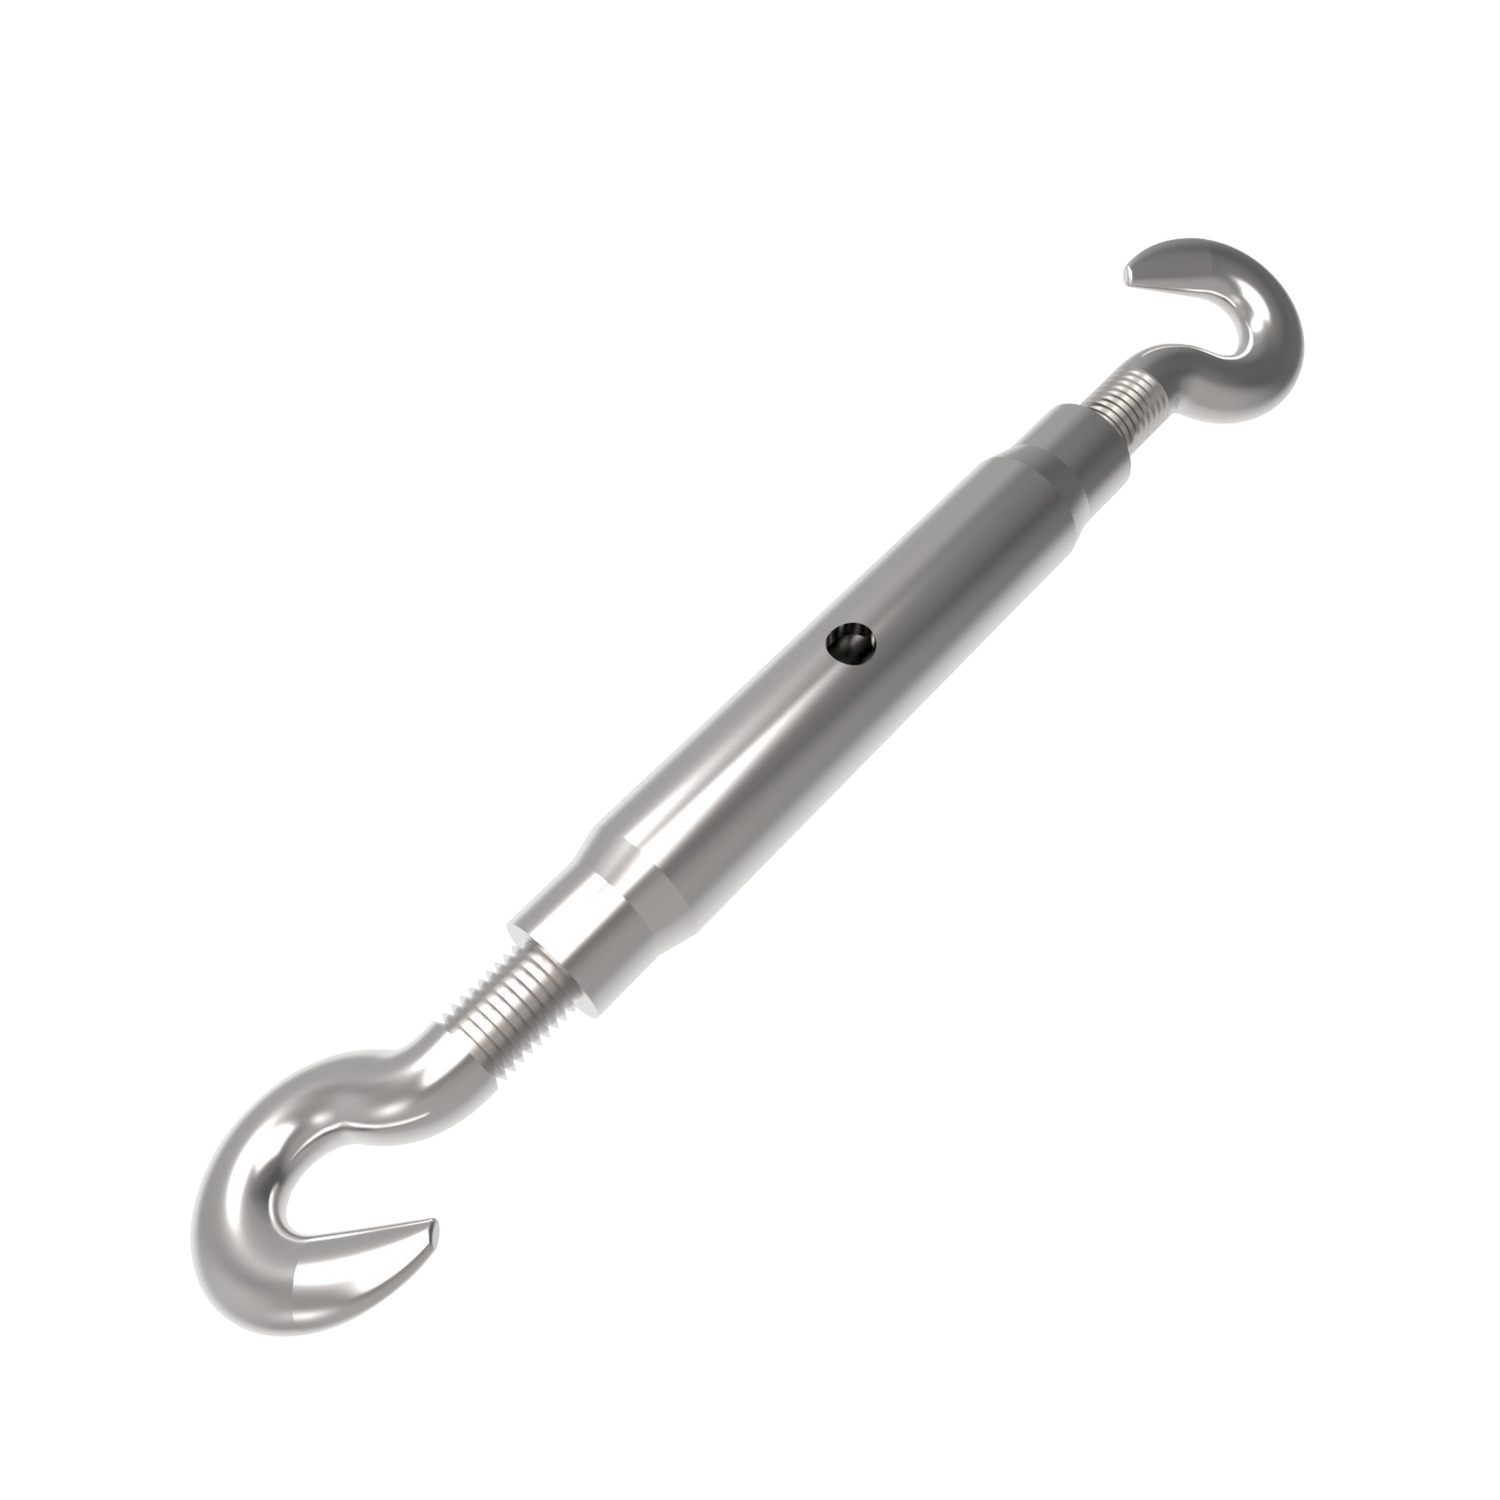 R3816.030-ZP Hook End Pipe Body Turnbuckles M30 steel Not to be used for lifting unless SWL marked.